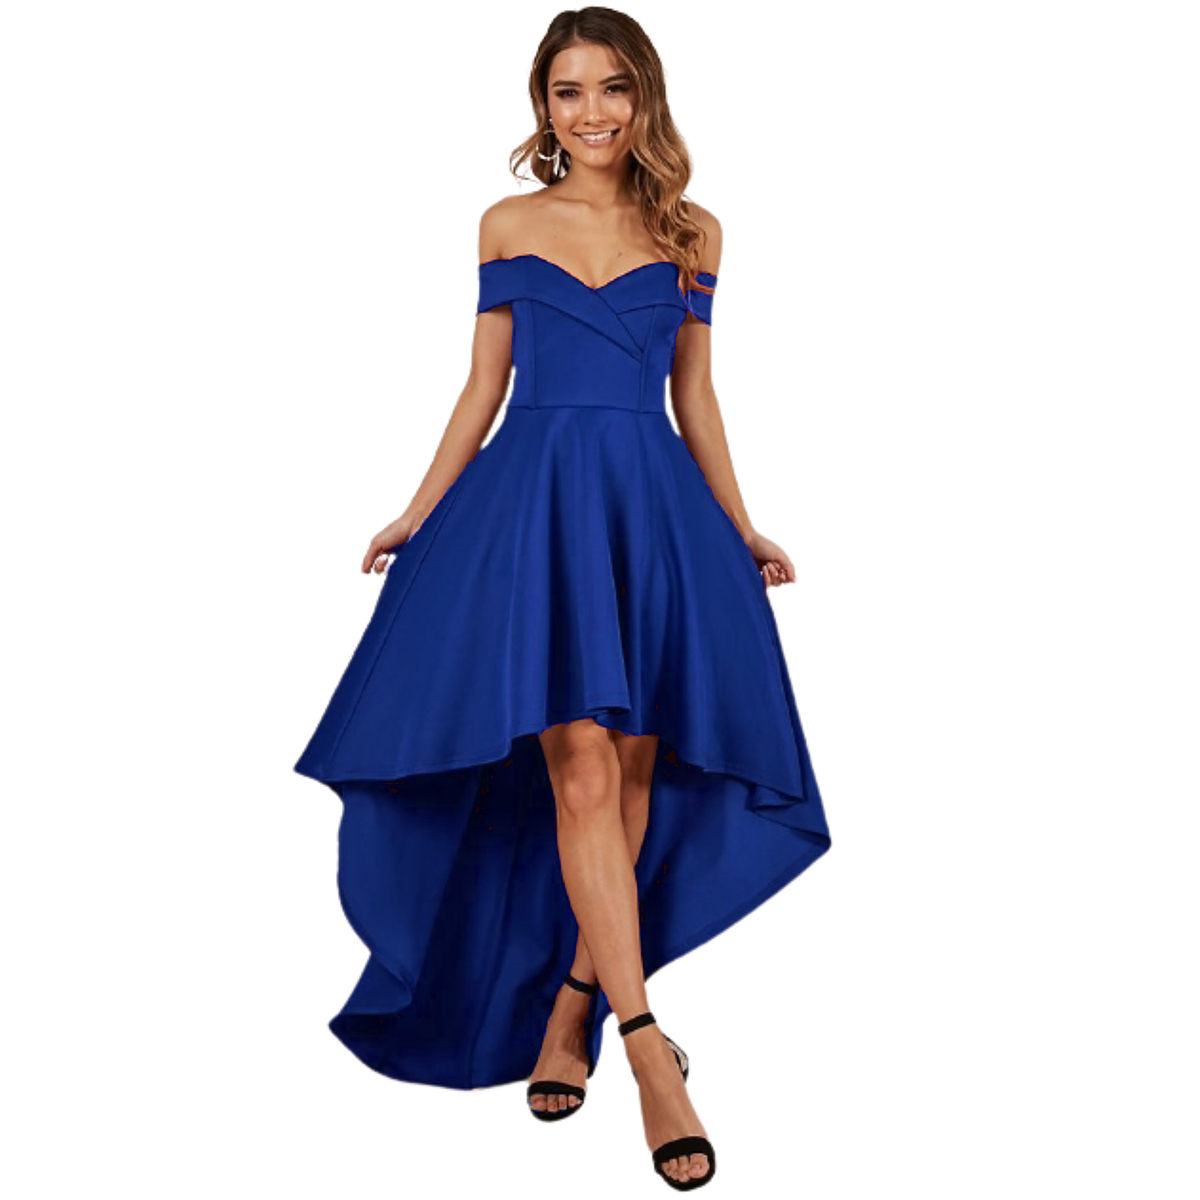 Color Party Dress Winter New Round Neck Long Sleeve Lace Dovetail Satin Ball Dress Vestidos Elegantes Para Mujer Dresses AliExpress | lupon.gov.ph